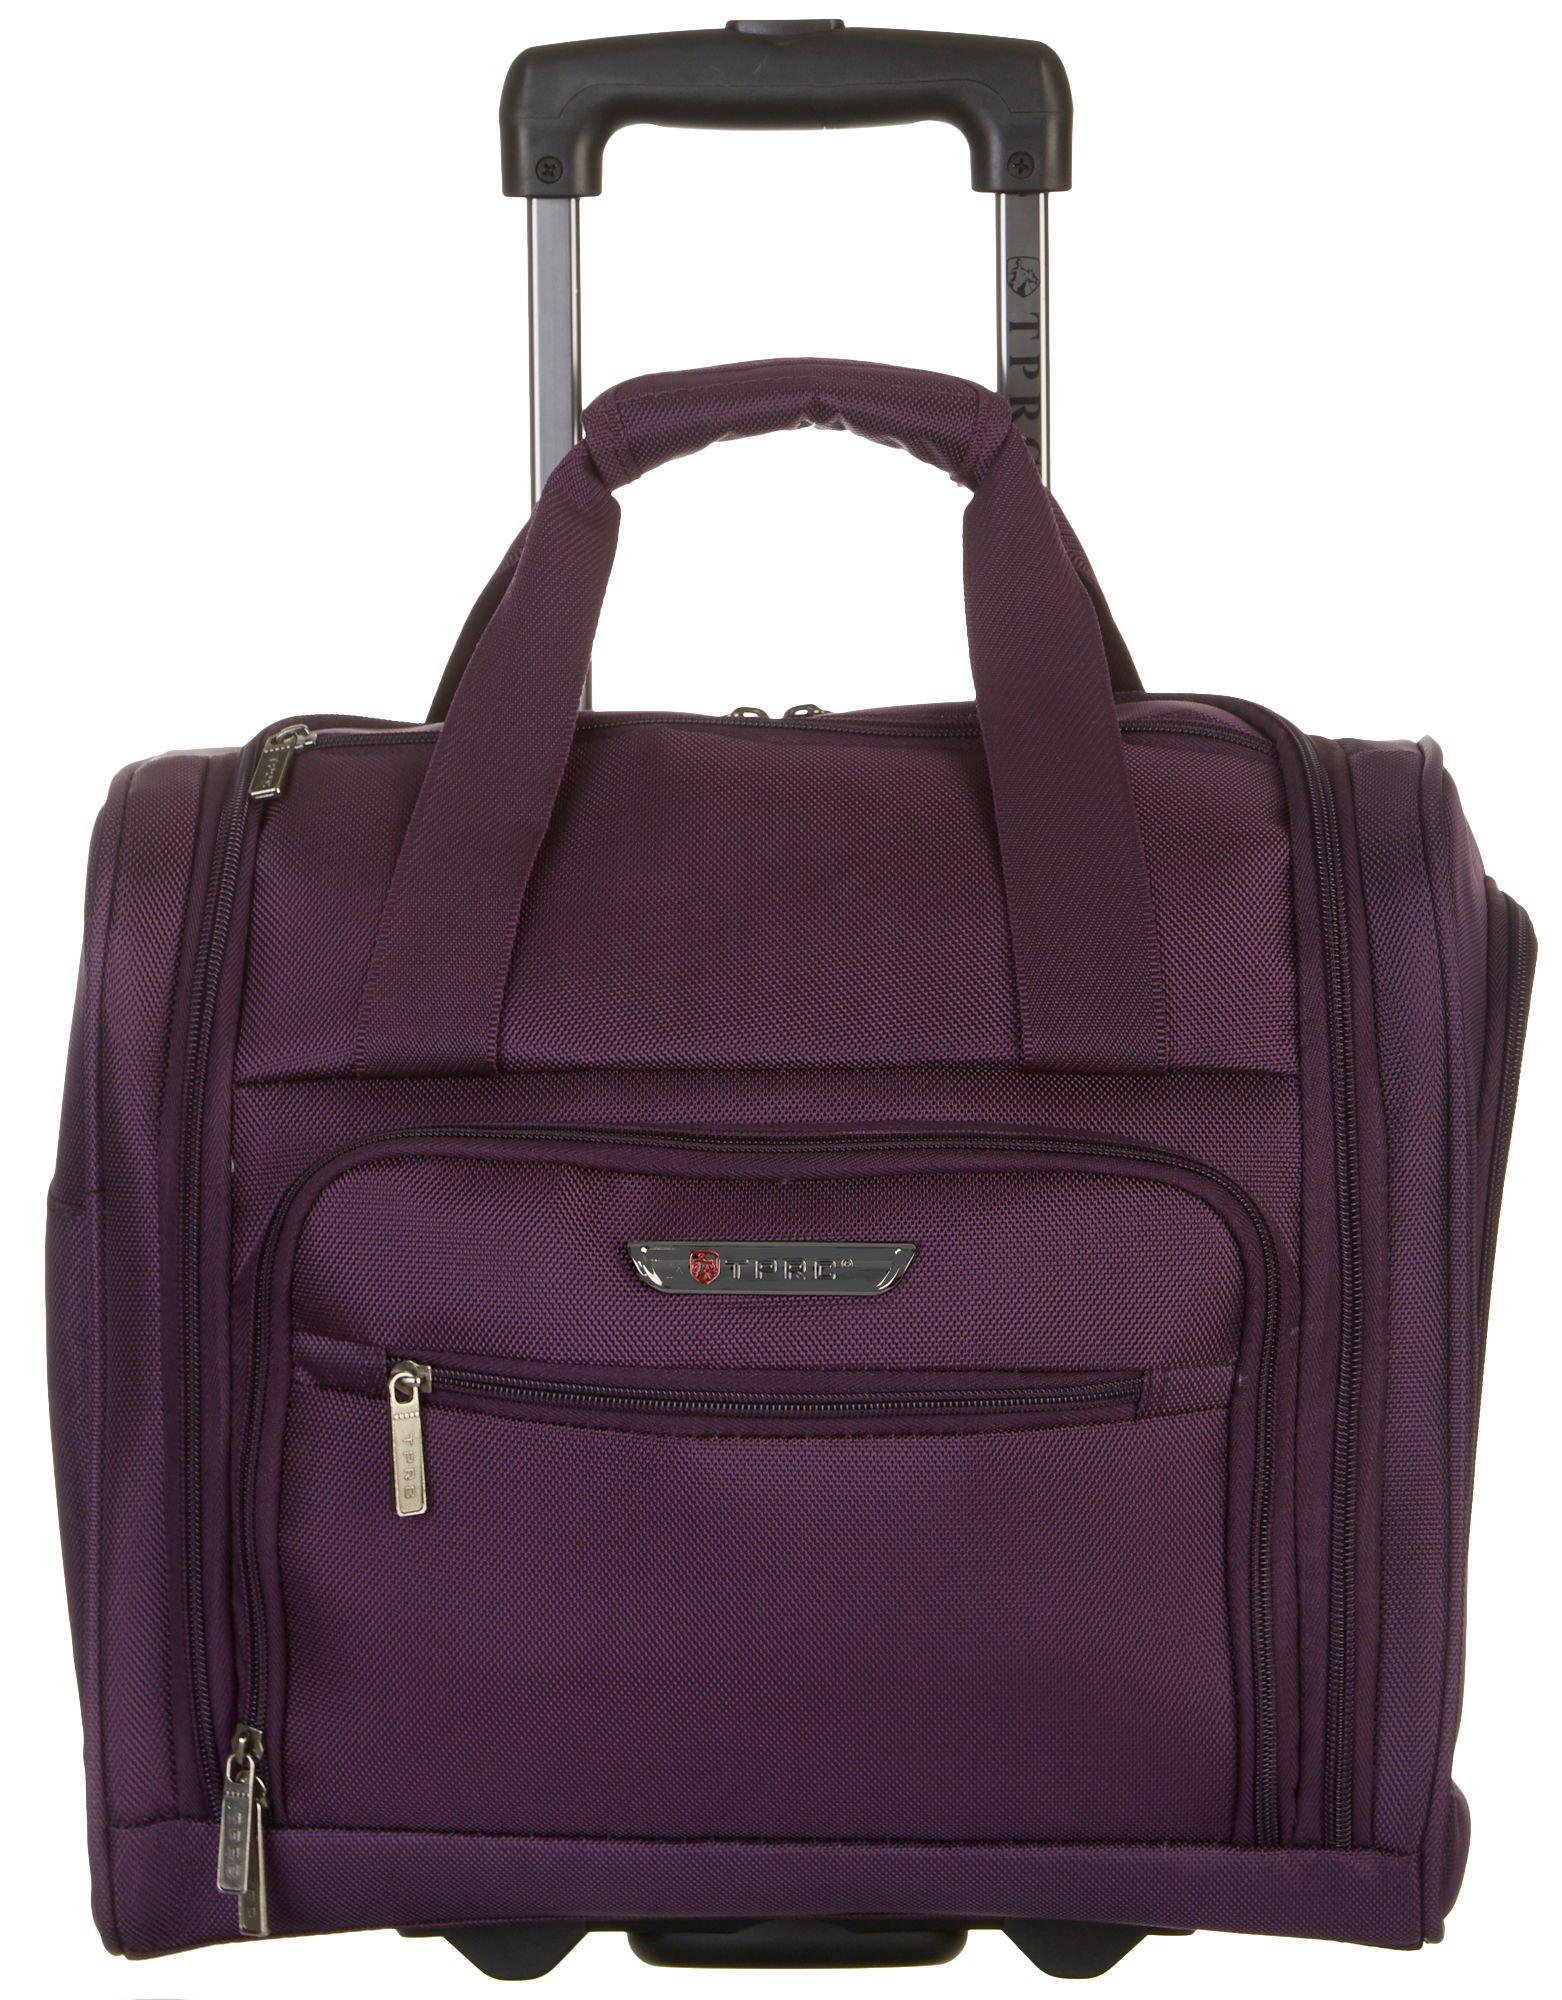 Luggage Sets, Tote Bags & Travel Accessories | Bealls Florida